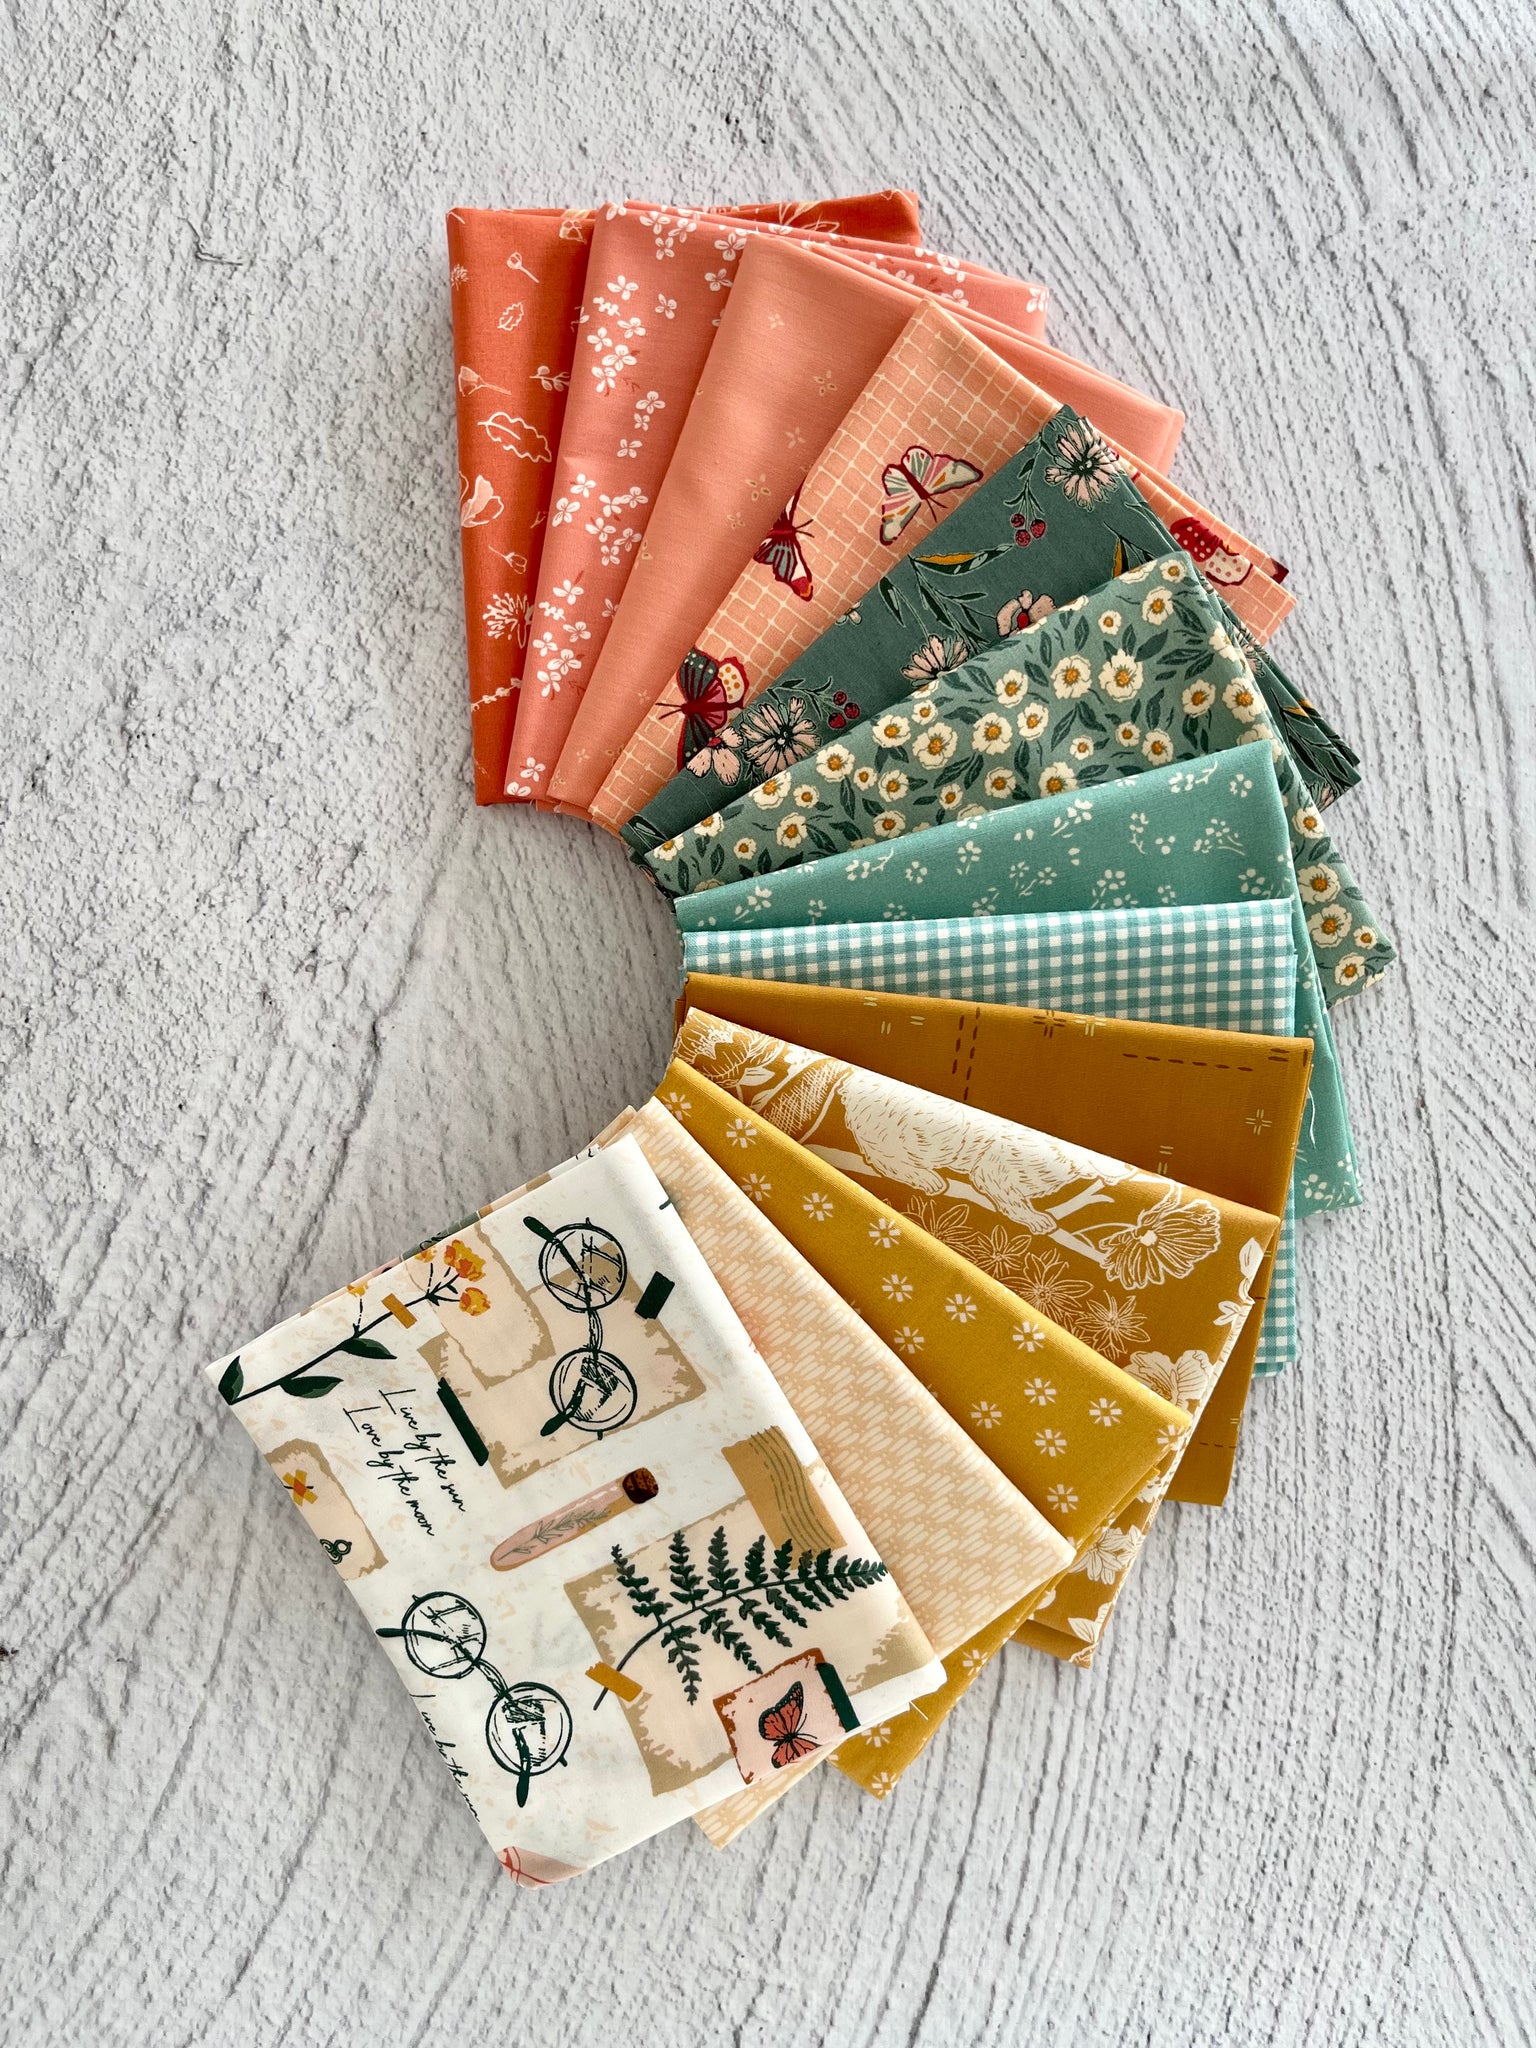 How About a Sunset Cruise? - Curated 13 Fat Quarter Bundle